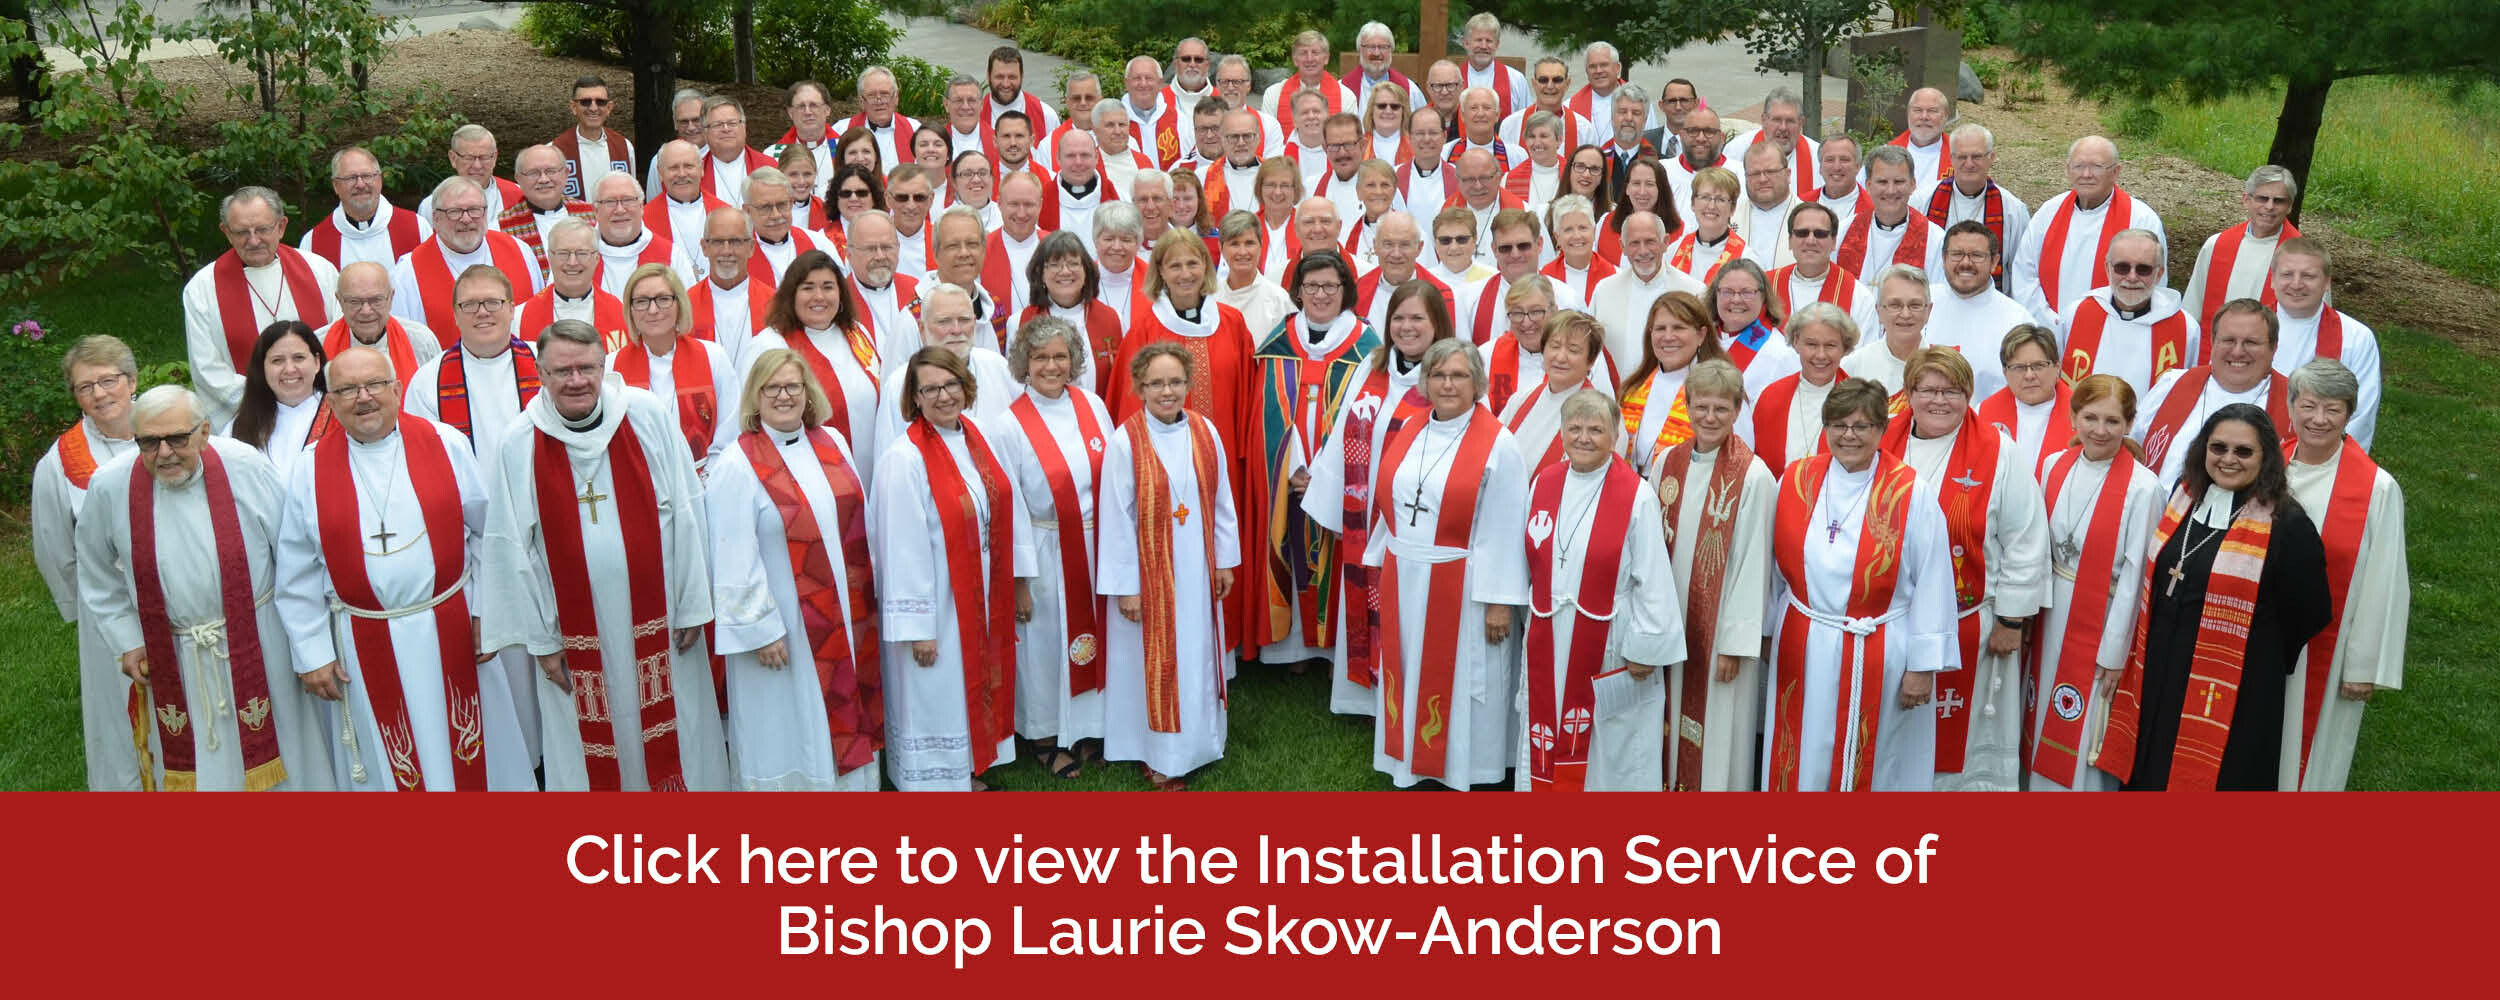 The Installation of Bishop Laurie Skow-Anderson